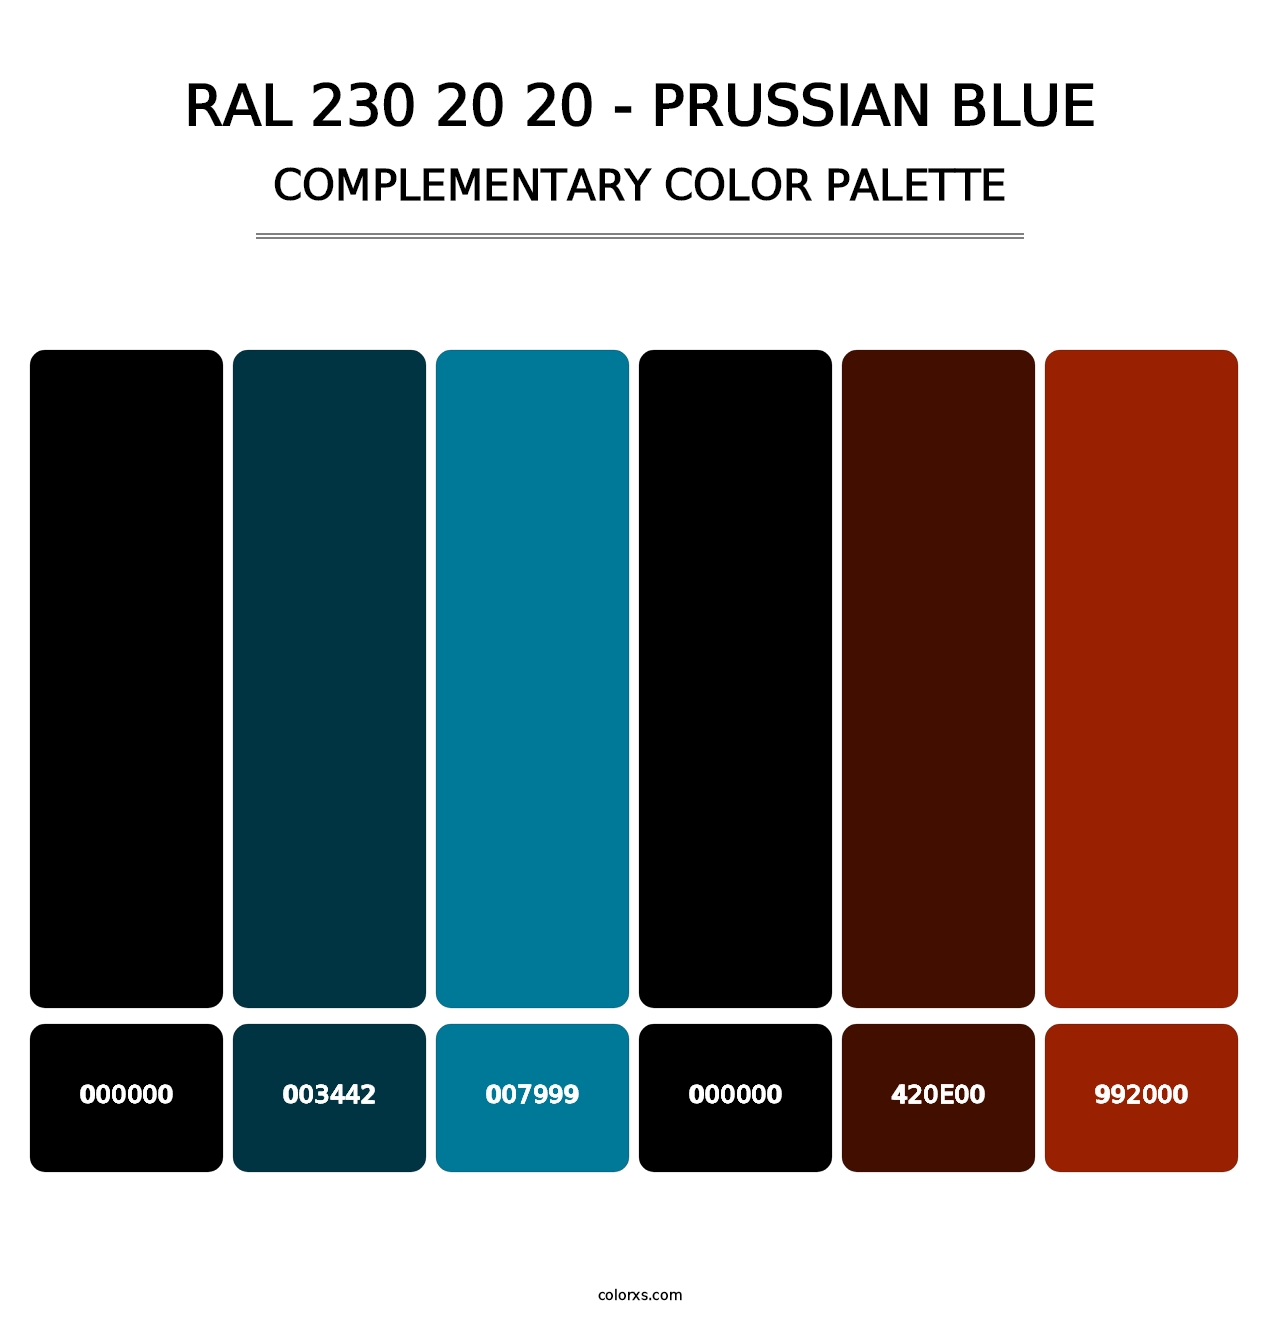 RAL 230 20 20 - Prussian Blue - Complementary Color Palette